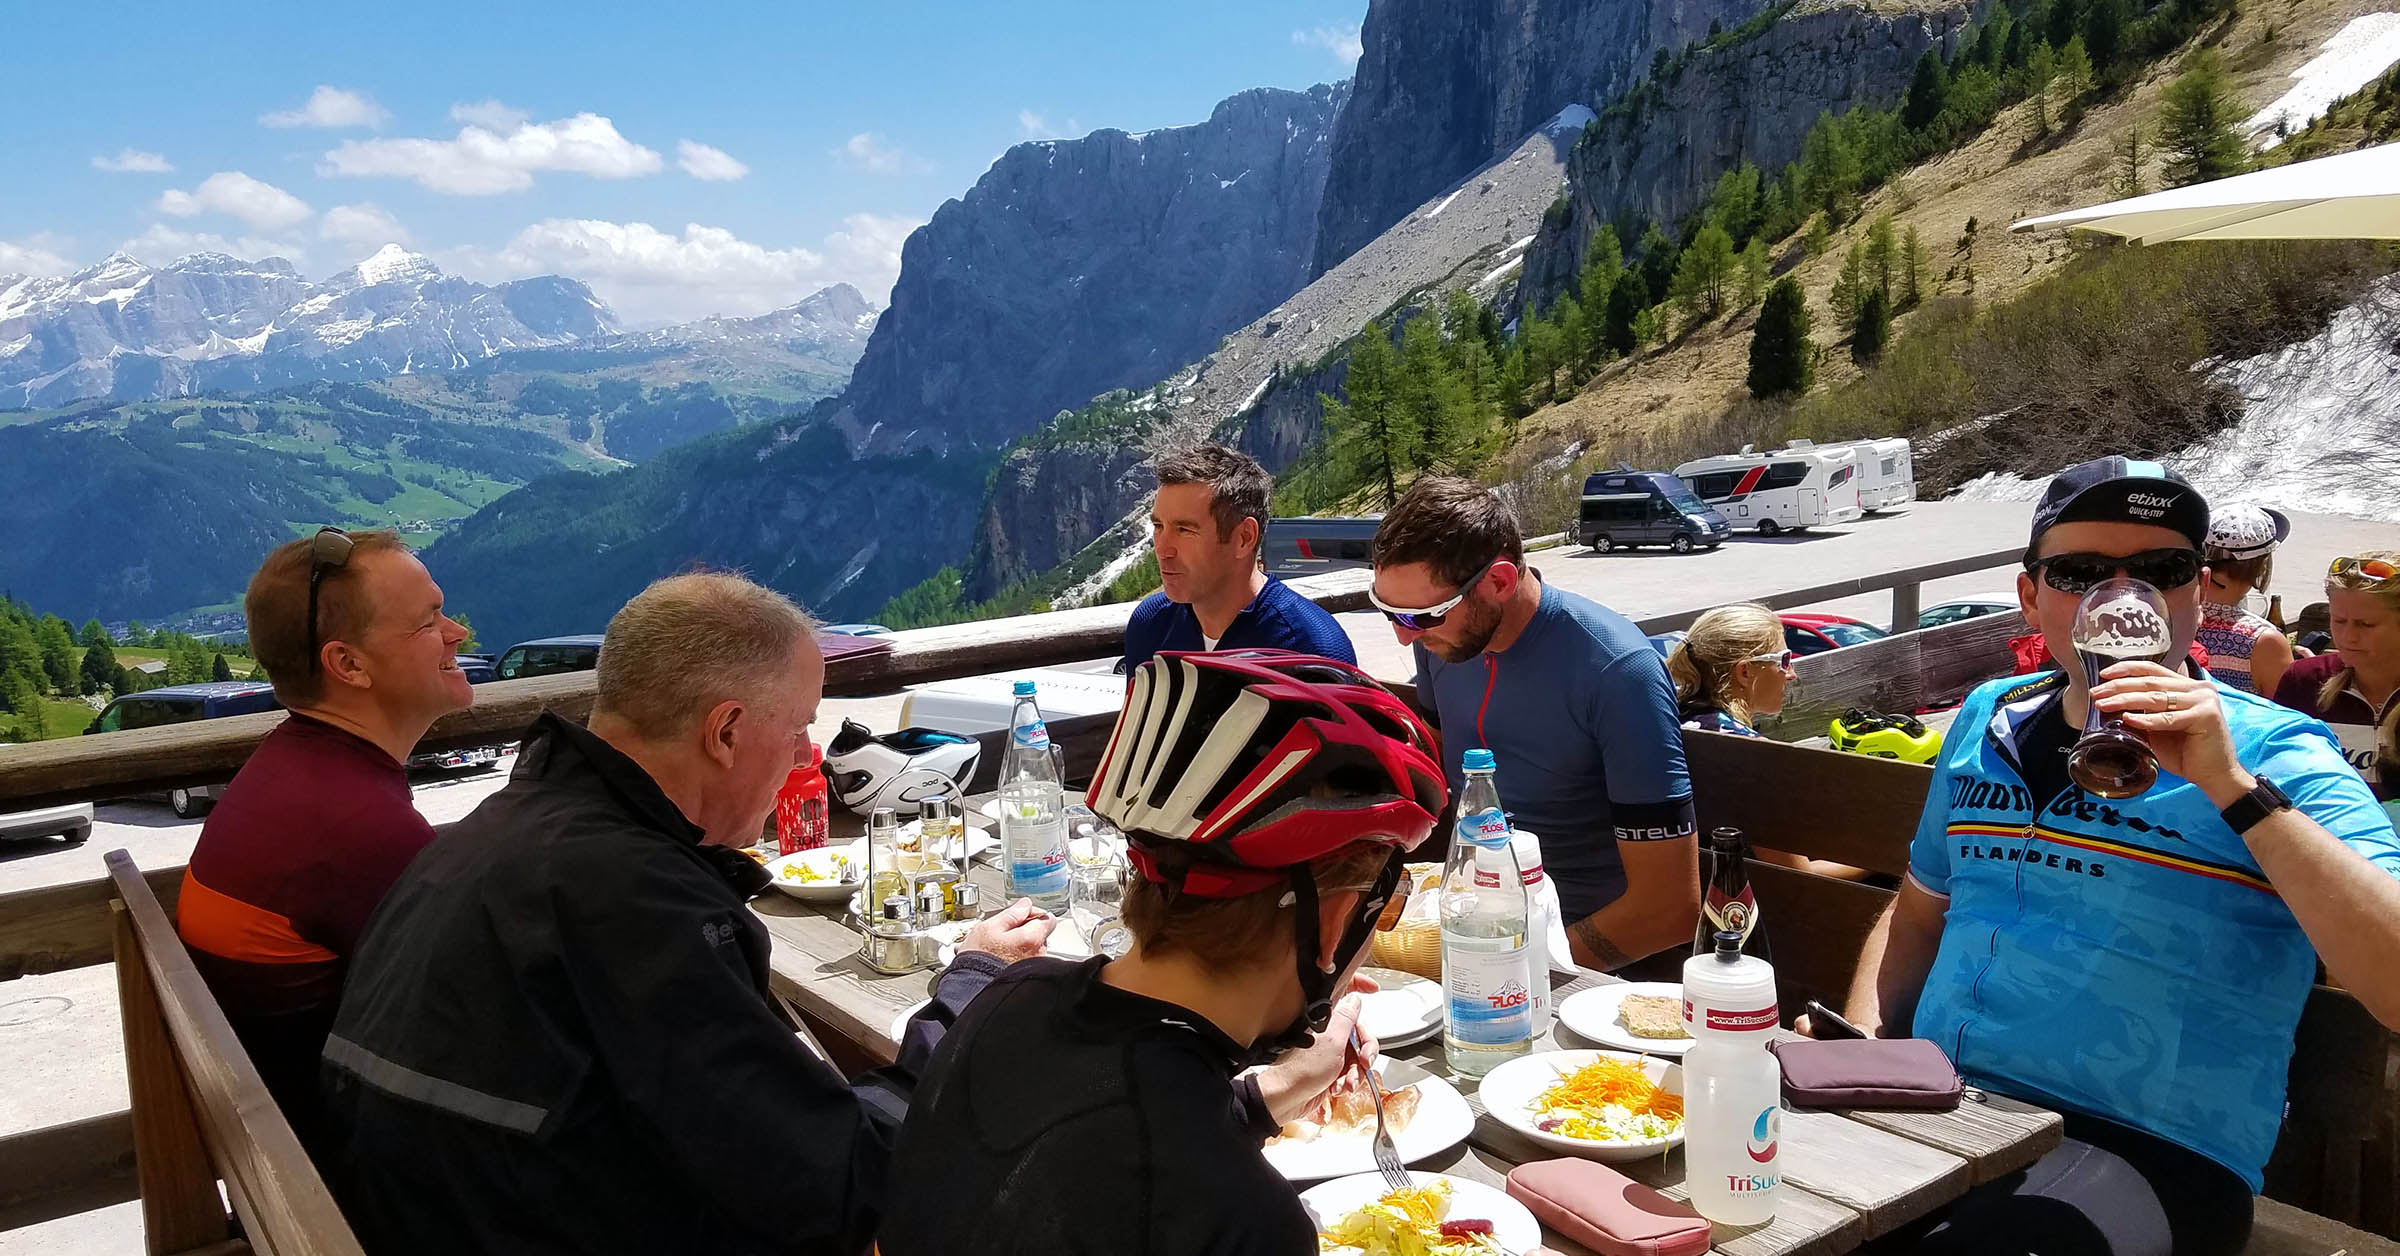 Dolomites bike trip - Cycling Vacation in Italy